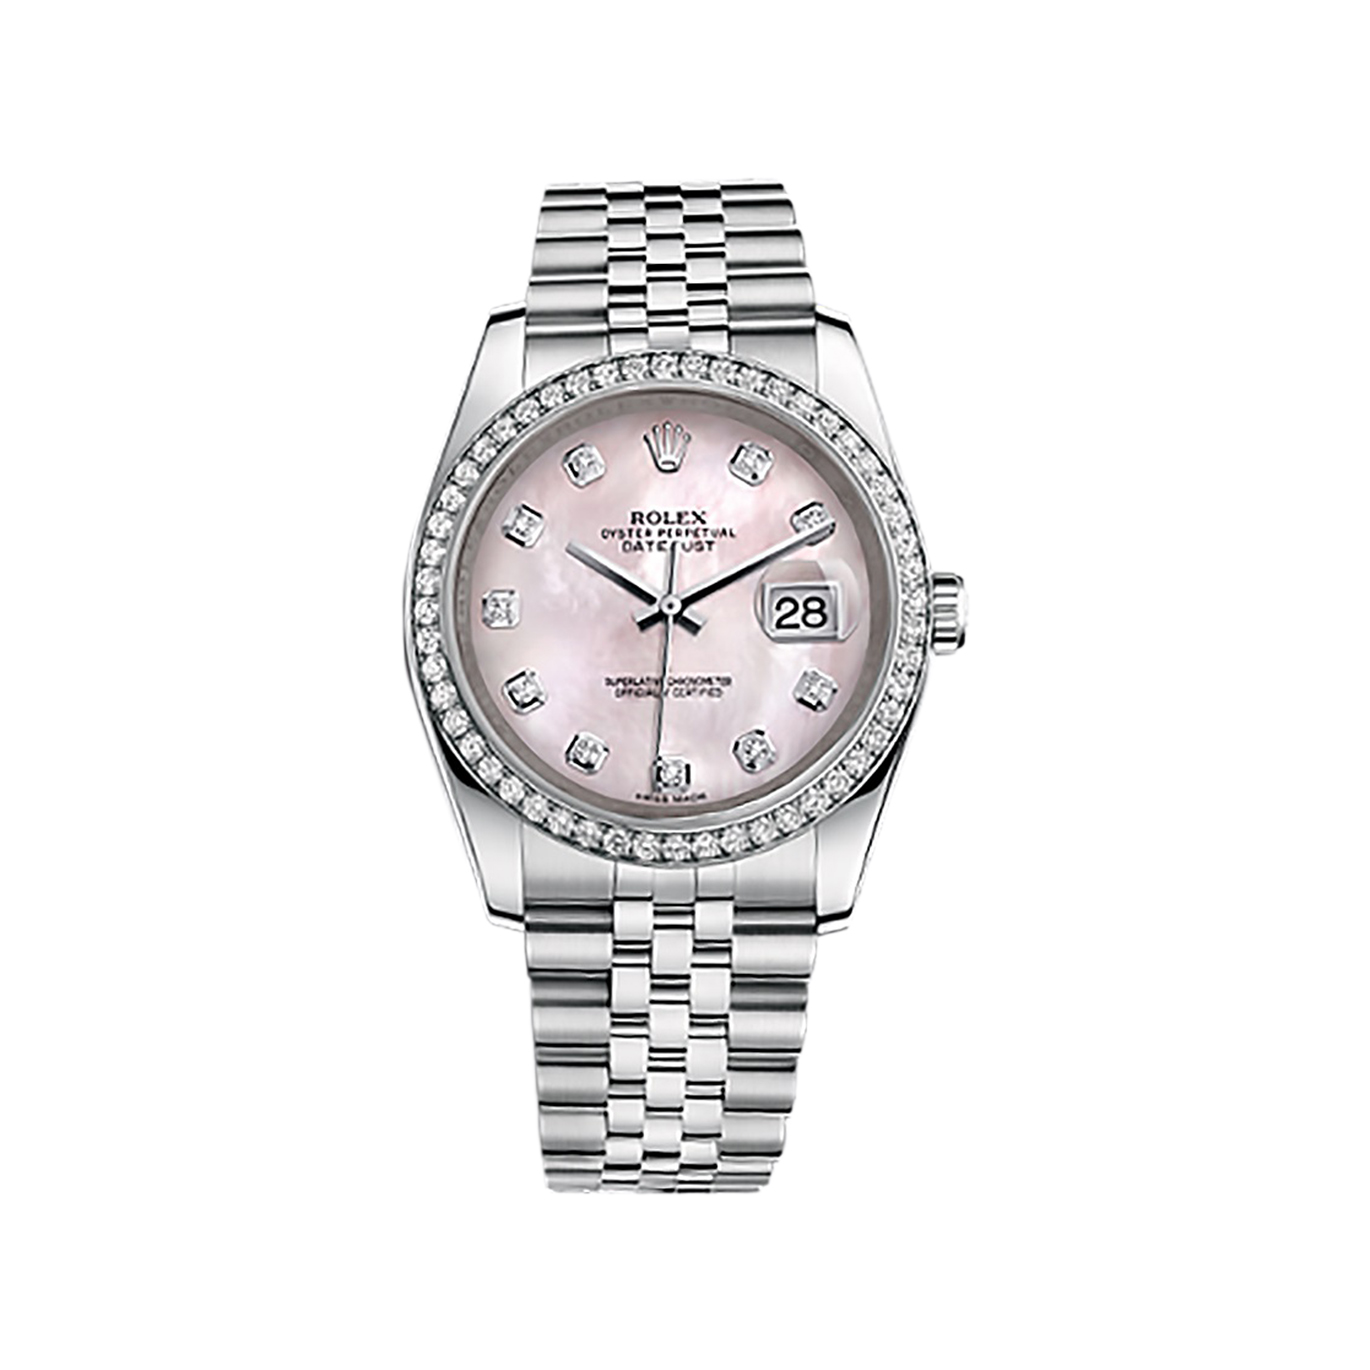 Datejust 36 116244 White Gold & Stainless Steel Watch (Pink Mother-of-Pearl Set with Diamonds)